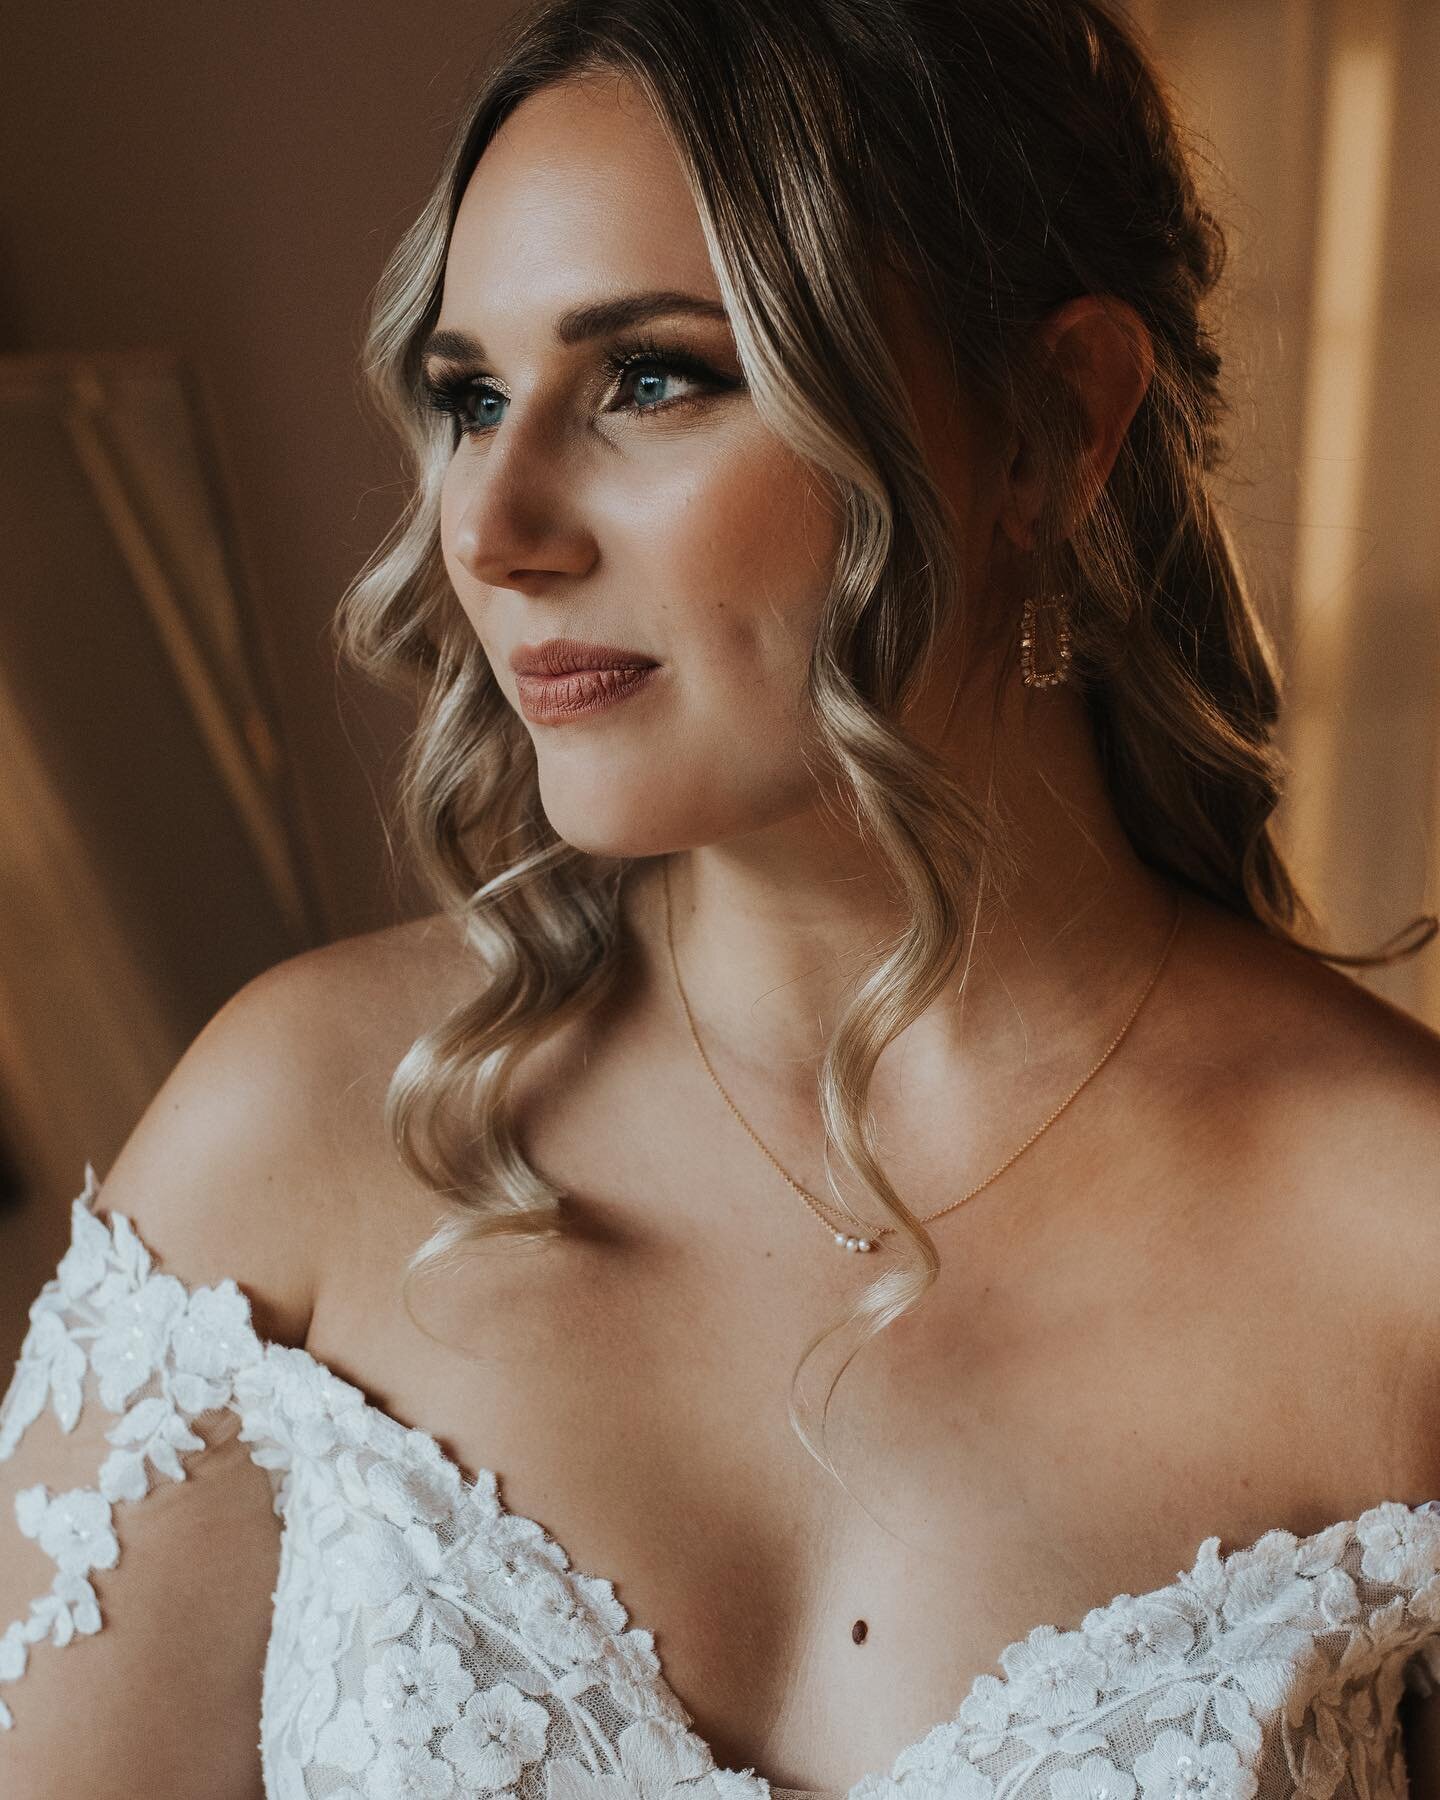 The mixture of gold and pearl in this  jewelry set from @delicadajewelry is so timeless and elegant. We love a good everyday piece that can also elevate your wedding day look. ✨

Hair and Makeup: @serobeautyco 
Photography: @robynelizaphotography 
Dr